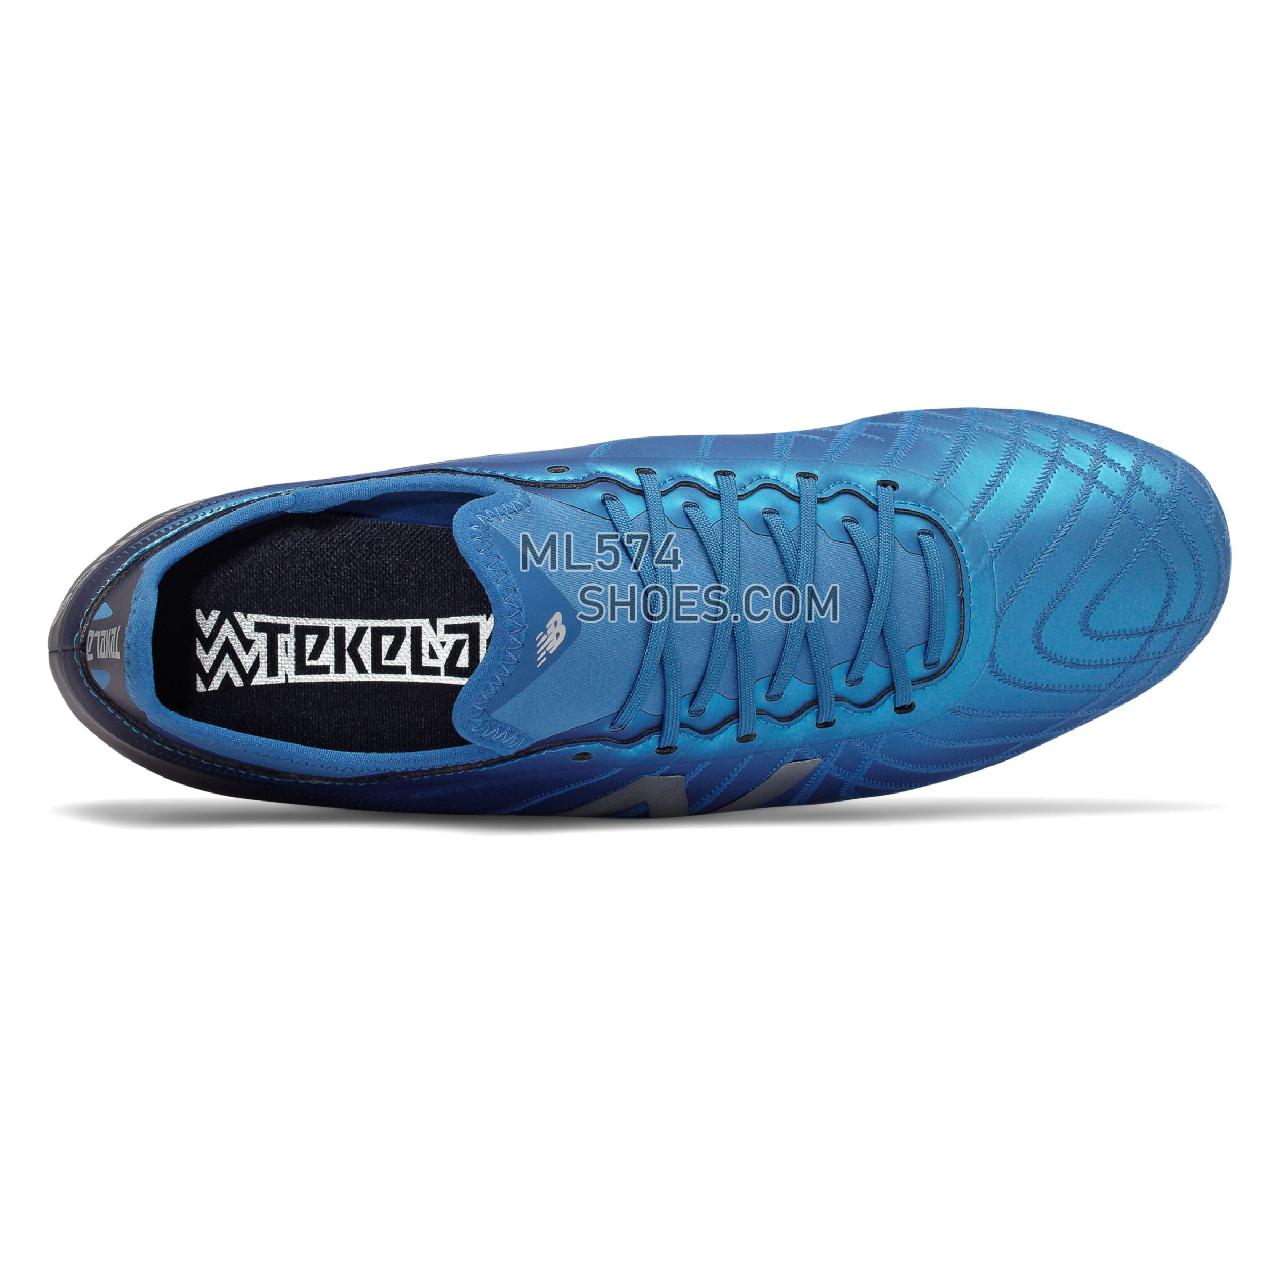 New Balance Tekela v2 Magia FG - Men's Soccer - Vision Blue with Neo Classic Blue and Team Navy - MSTMFVC2